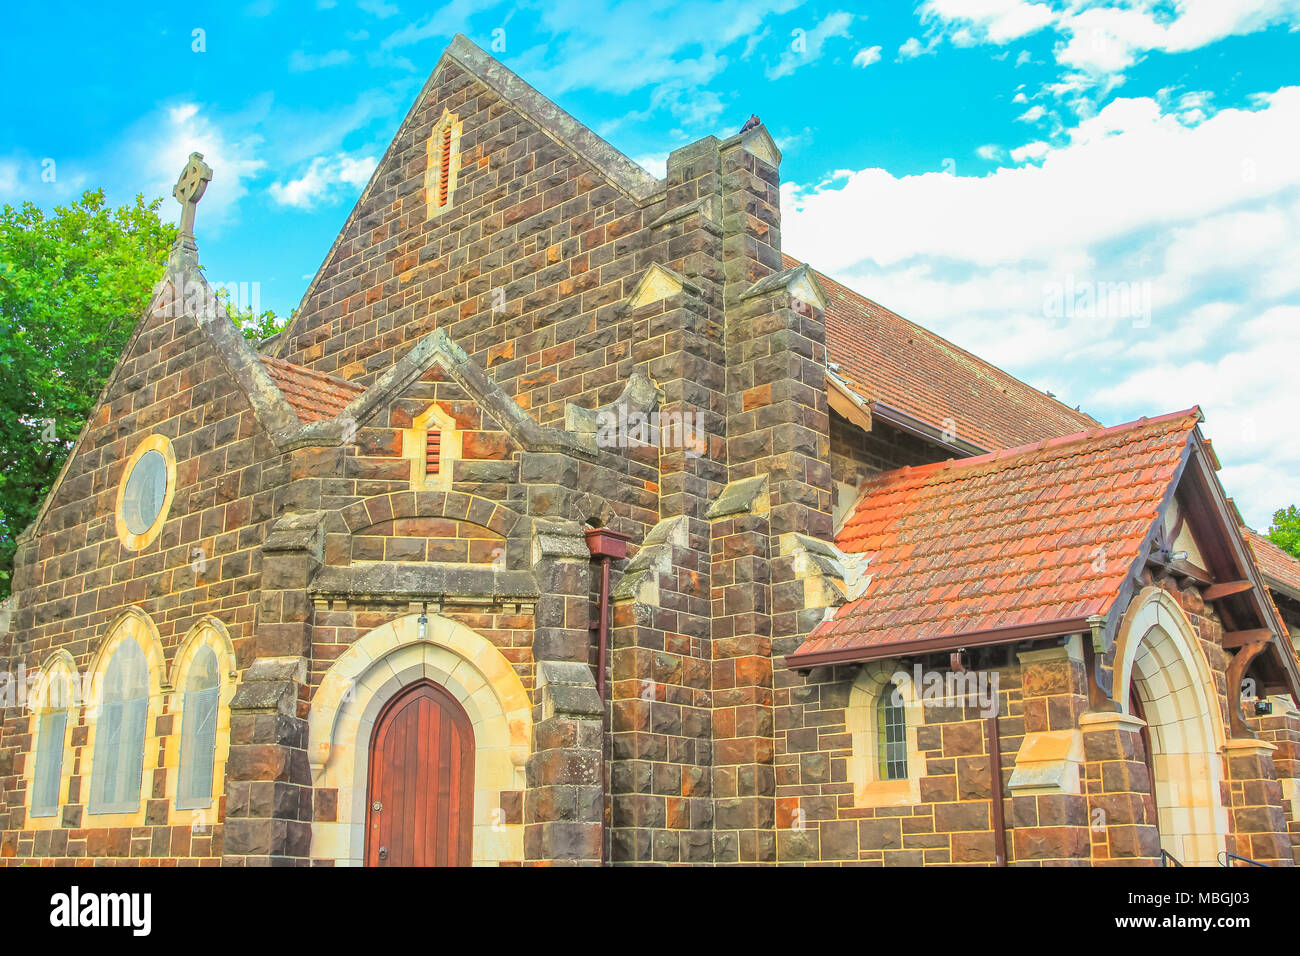 Facade of historic St. Georges Anglican Church in Knysna on the Garden Route in Western Cape, South Africa. The old Church as built in 1855. Stock Photo